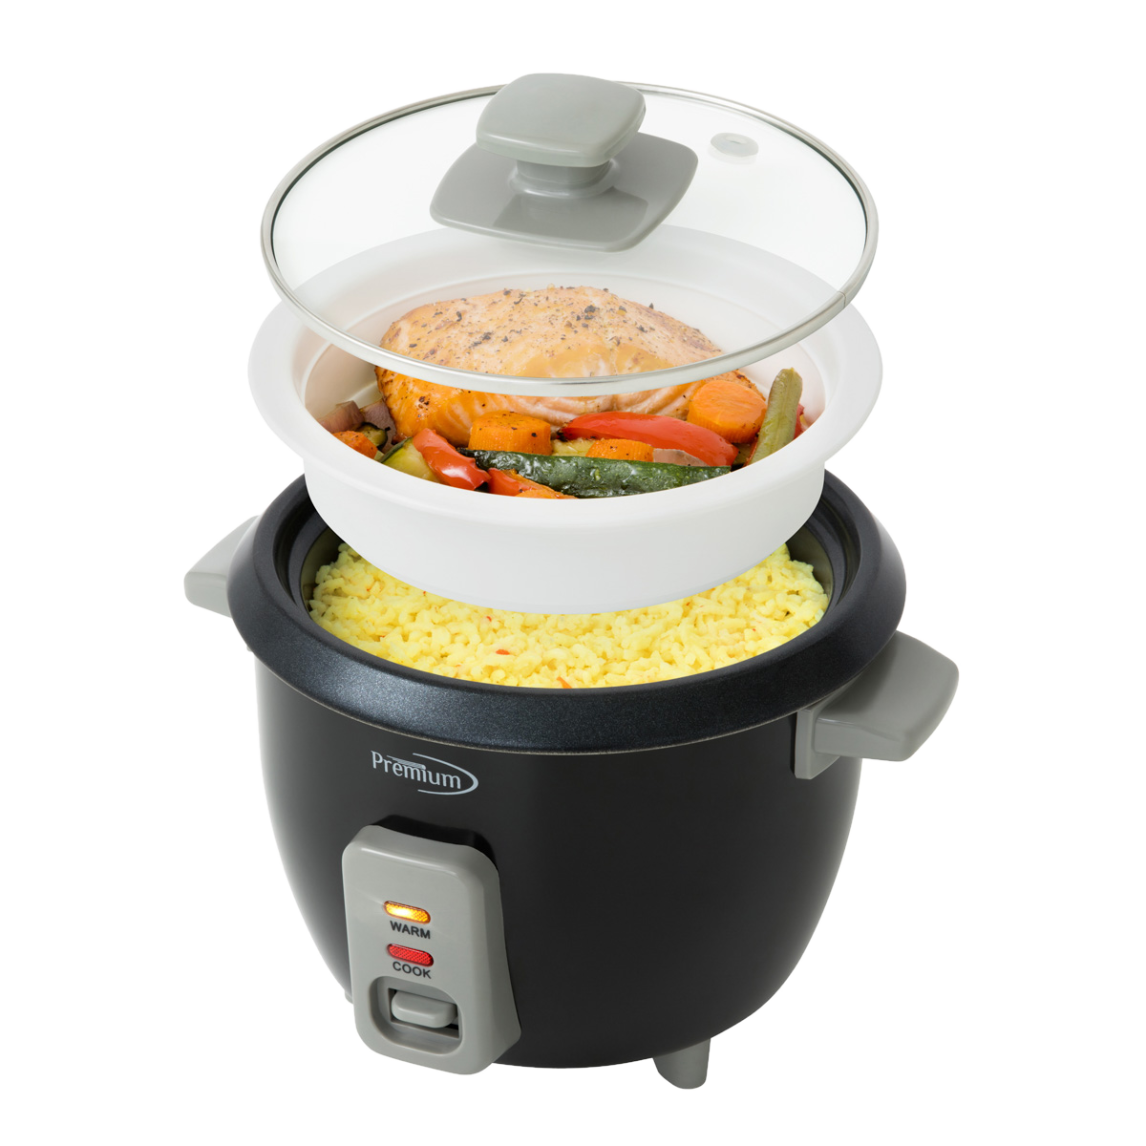 Premium - 6-Cup Rice Cooker and Steamer - Black